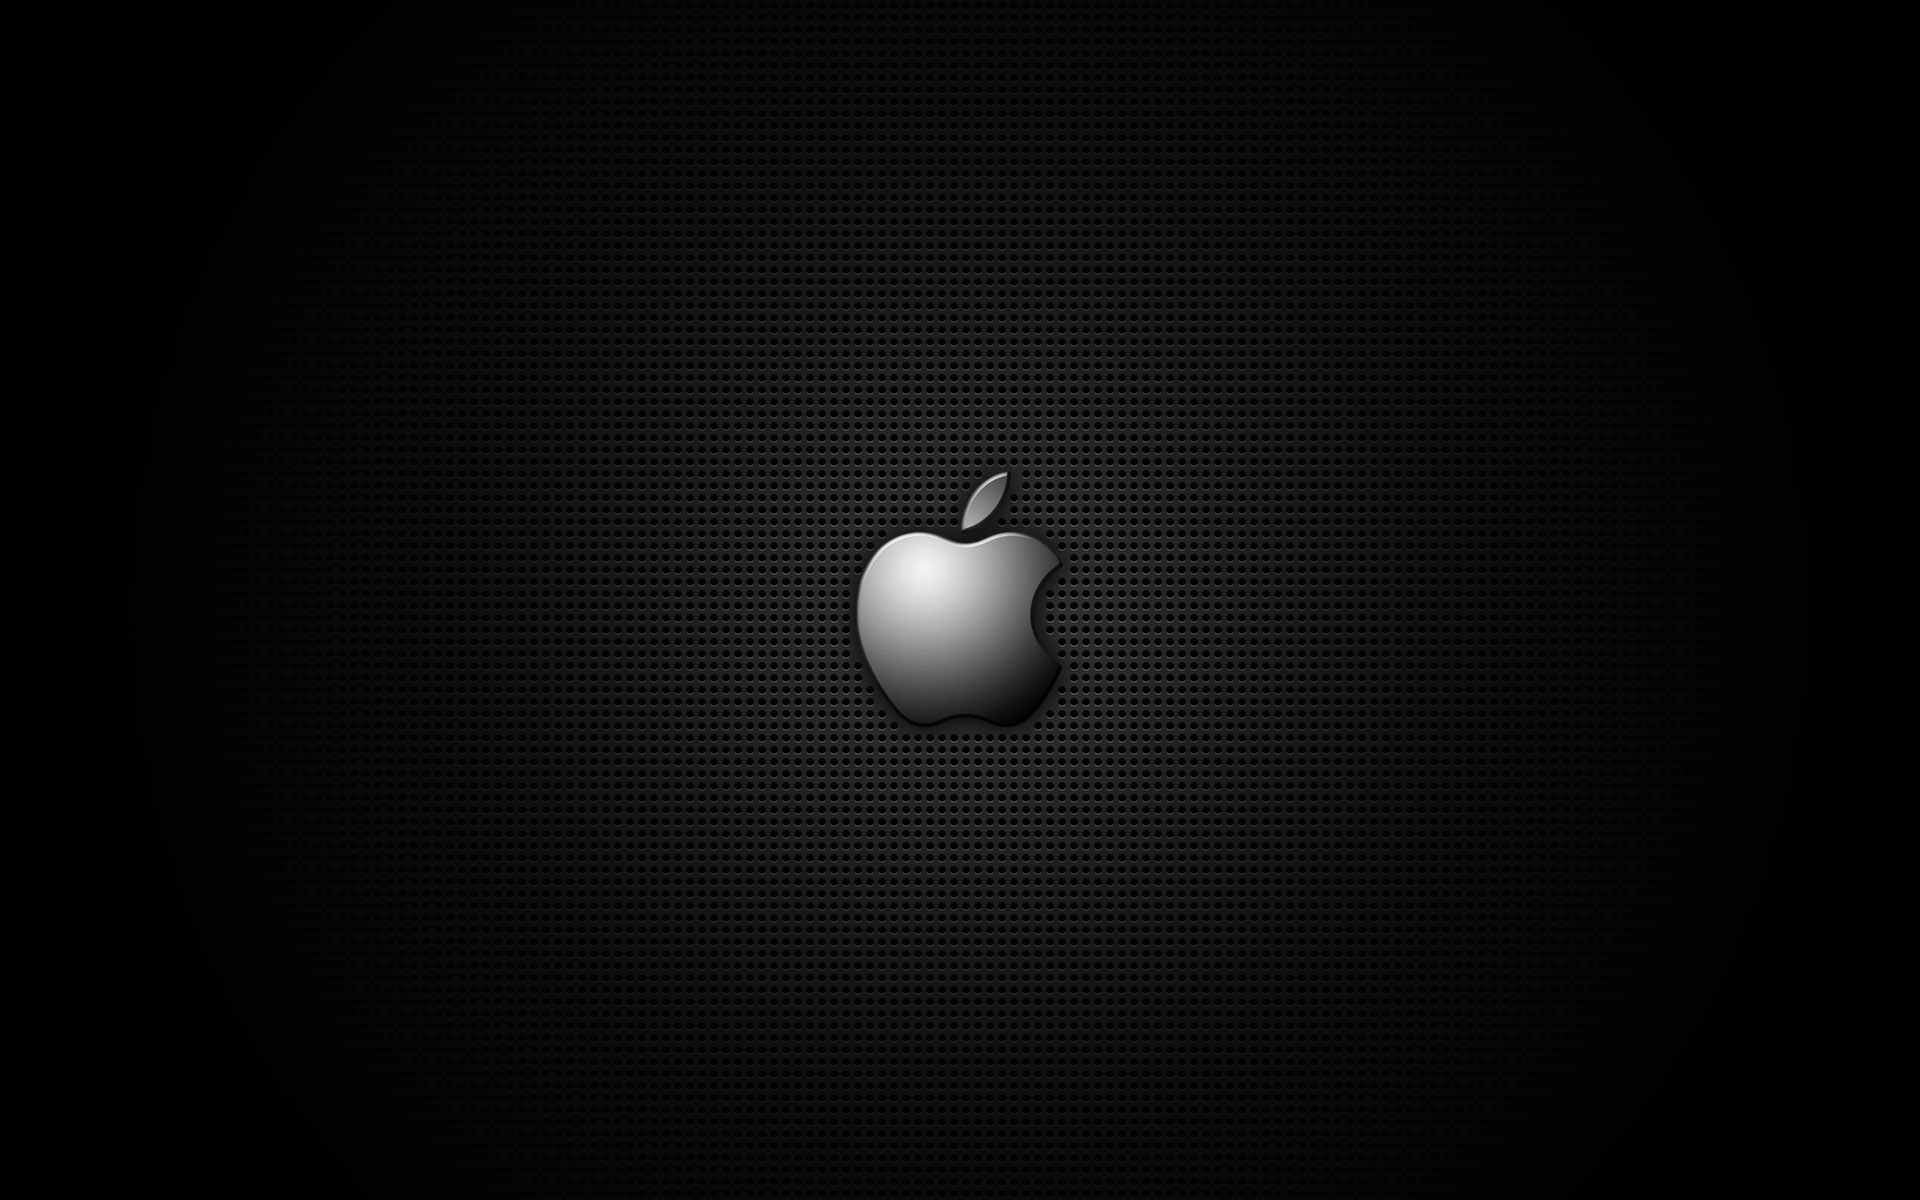  Apple HQ Background Images